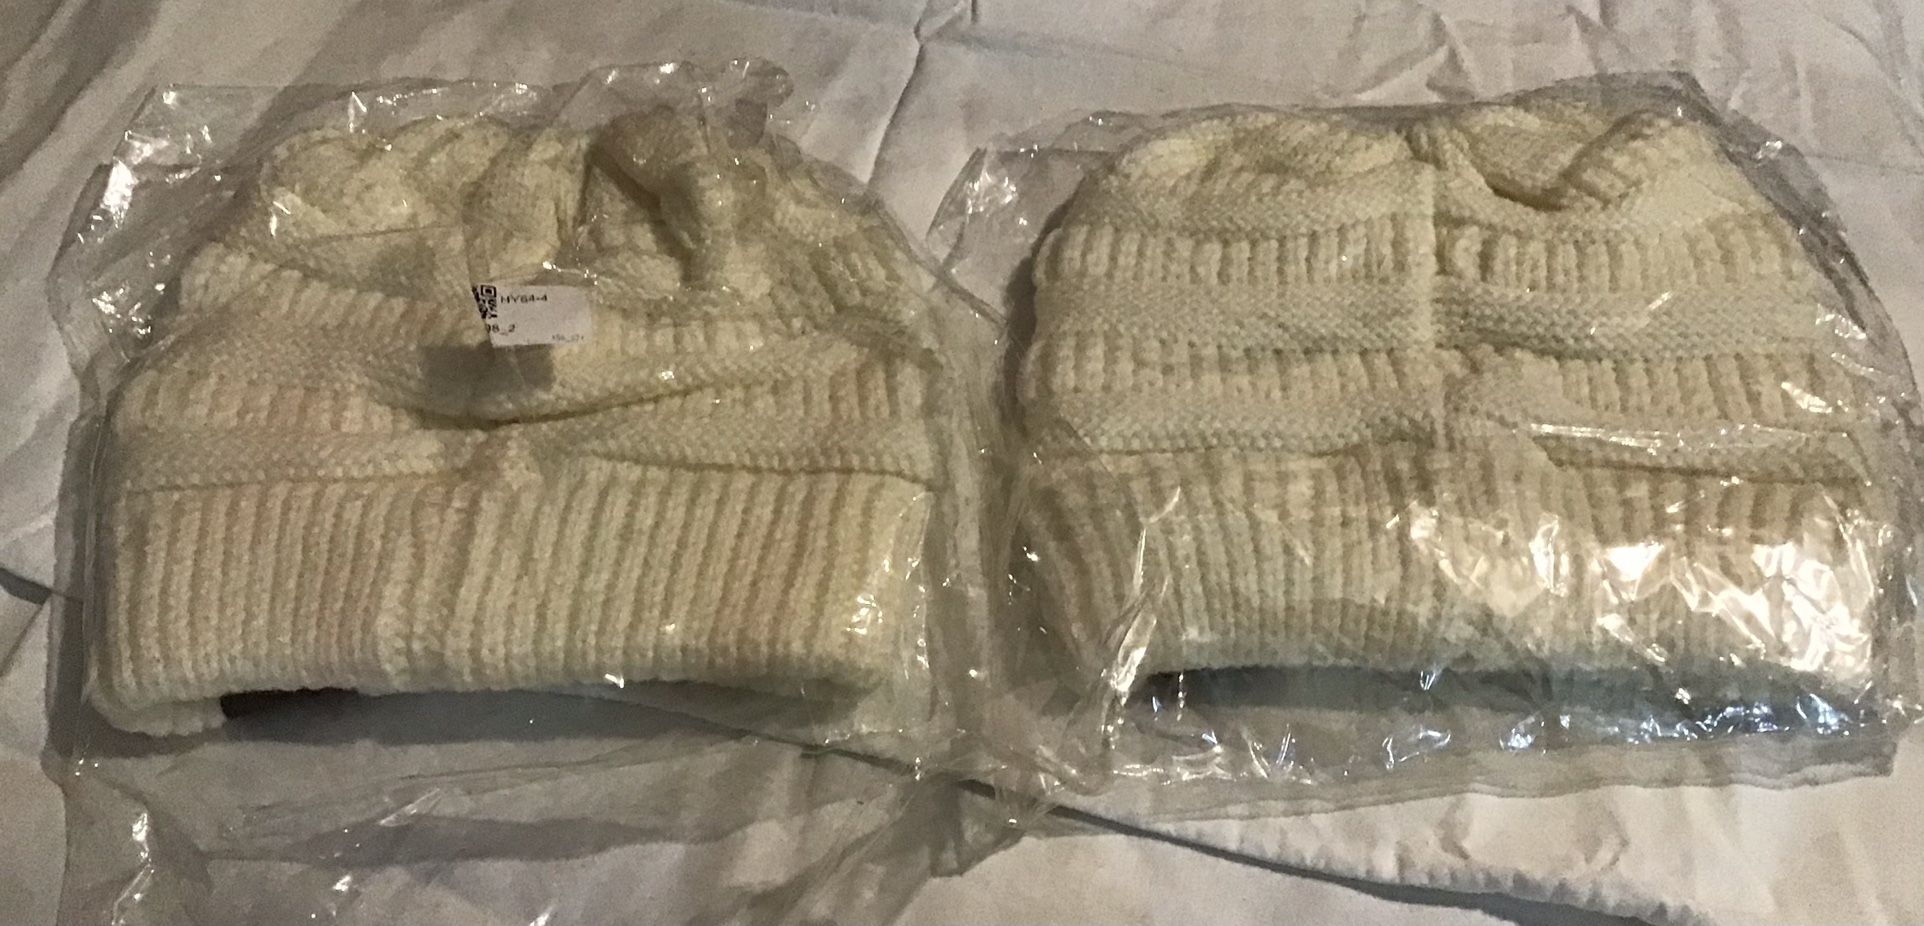 C. C Exclusives Cable Knit Beanie - Thick, Soft & Warm Chunky Beanie Hats New in Package $5 Each